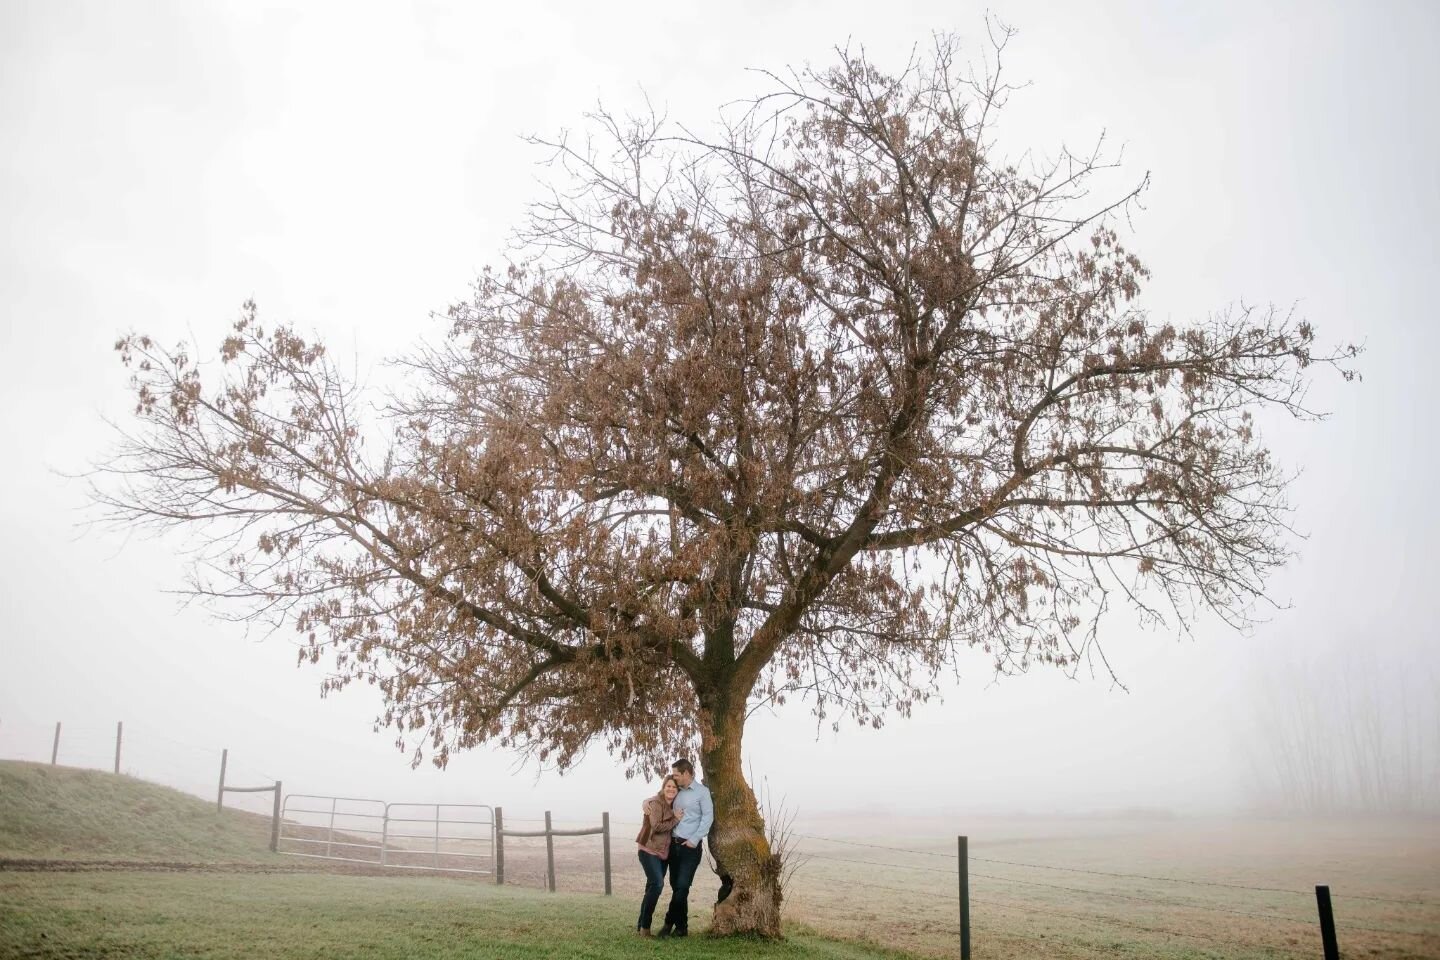 How can you not love a foggy farm family photo vibe?!

This set is chalk-full of amazing people AND snaps 🤩

#family #familyphotos #familyphotography #familyphotographer #foggy #farm #farmlife #love #itsalifestyle #organic #salmonarmfamilyphotograph